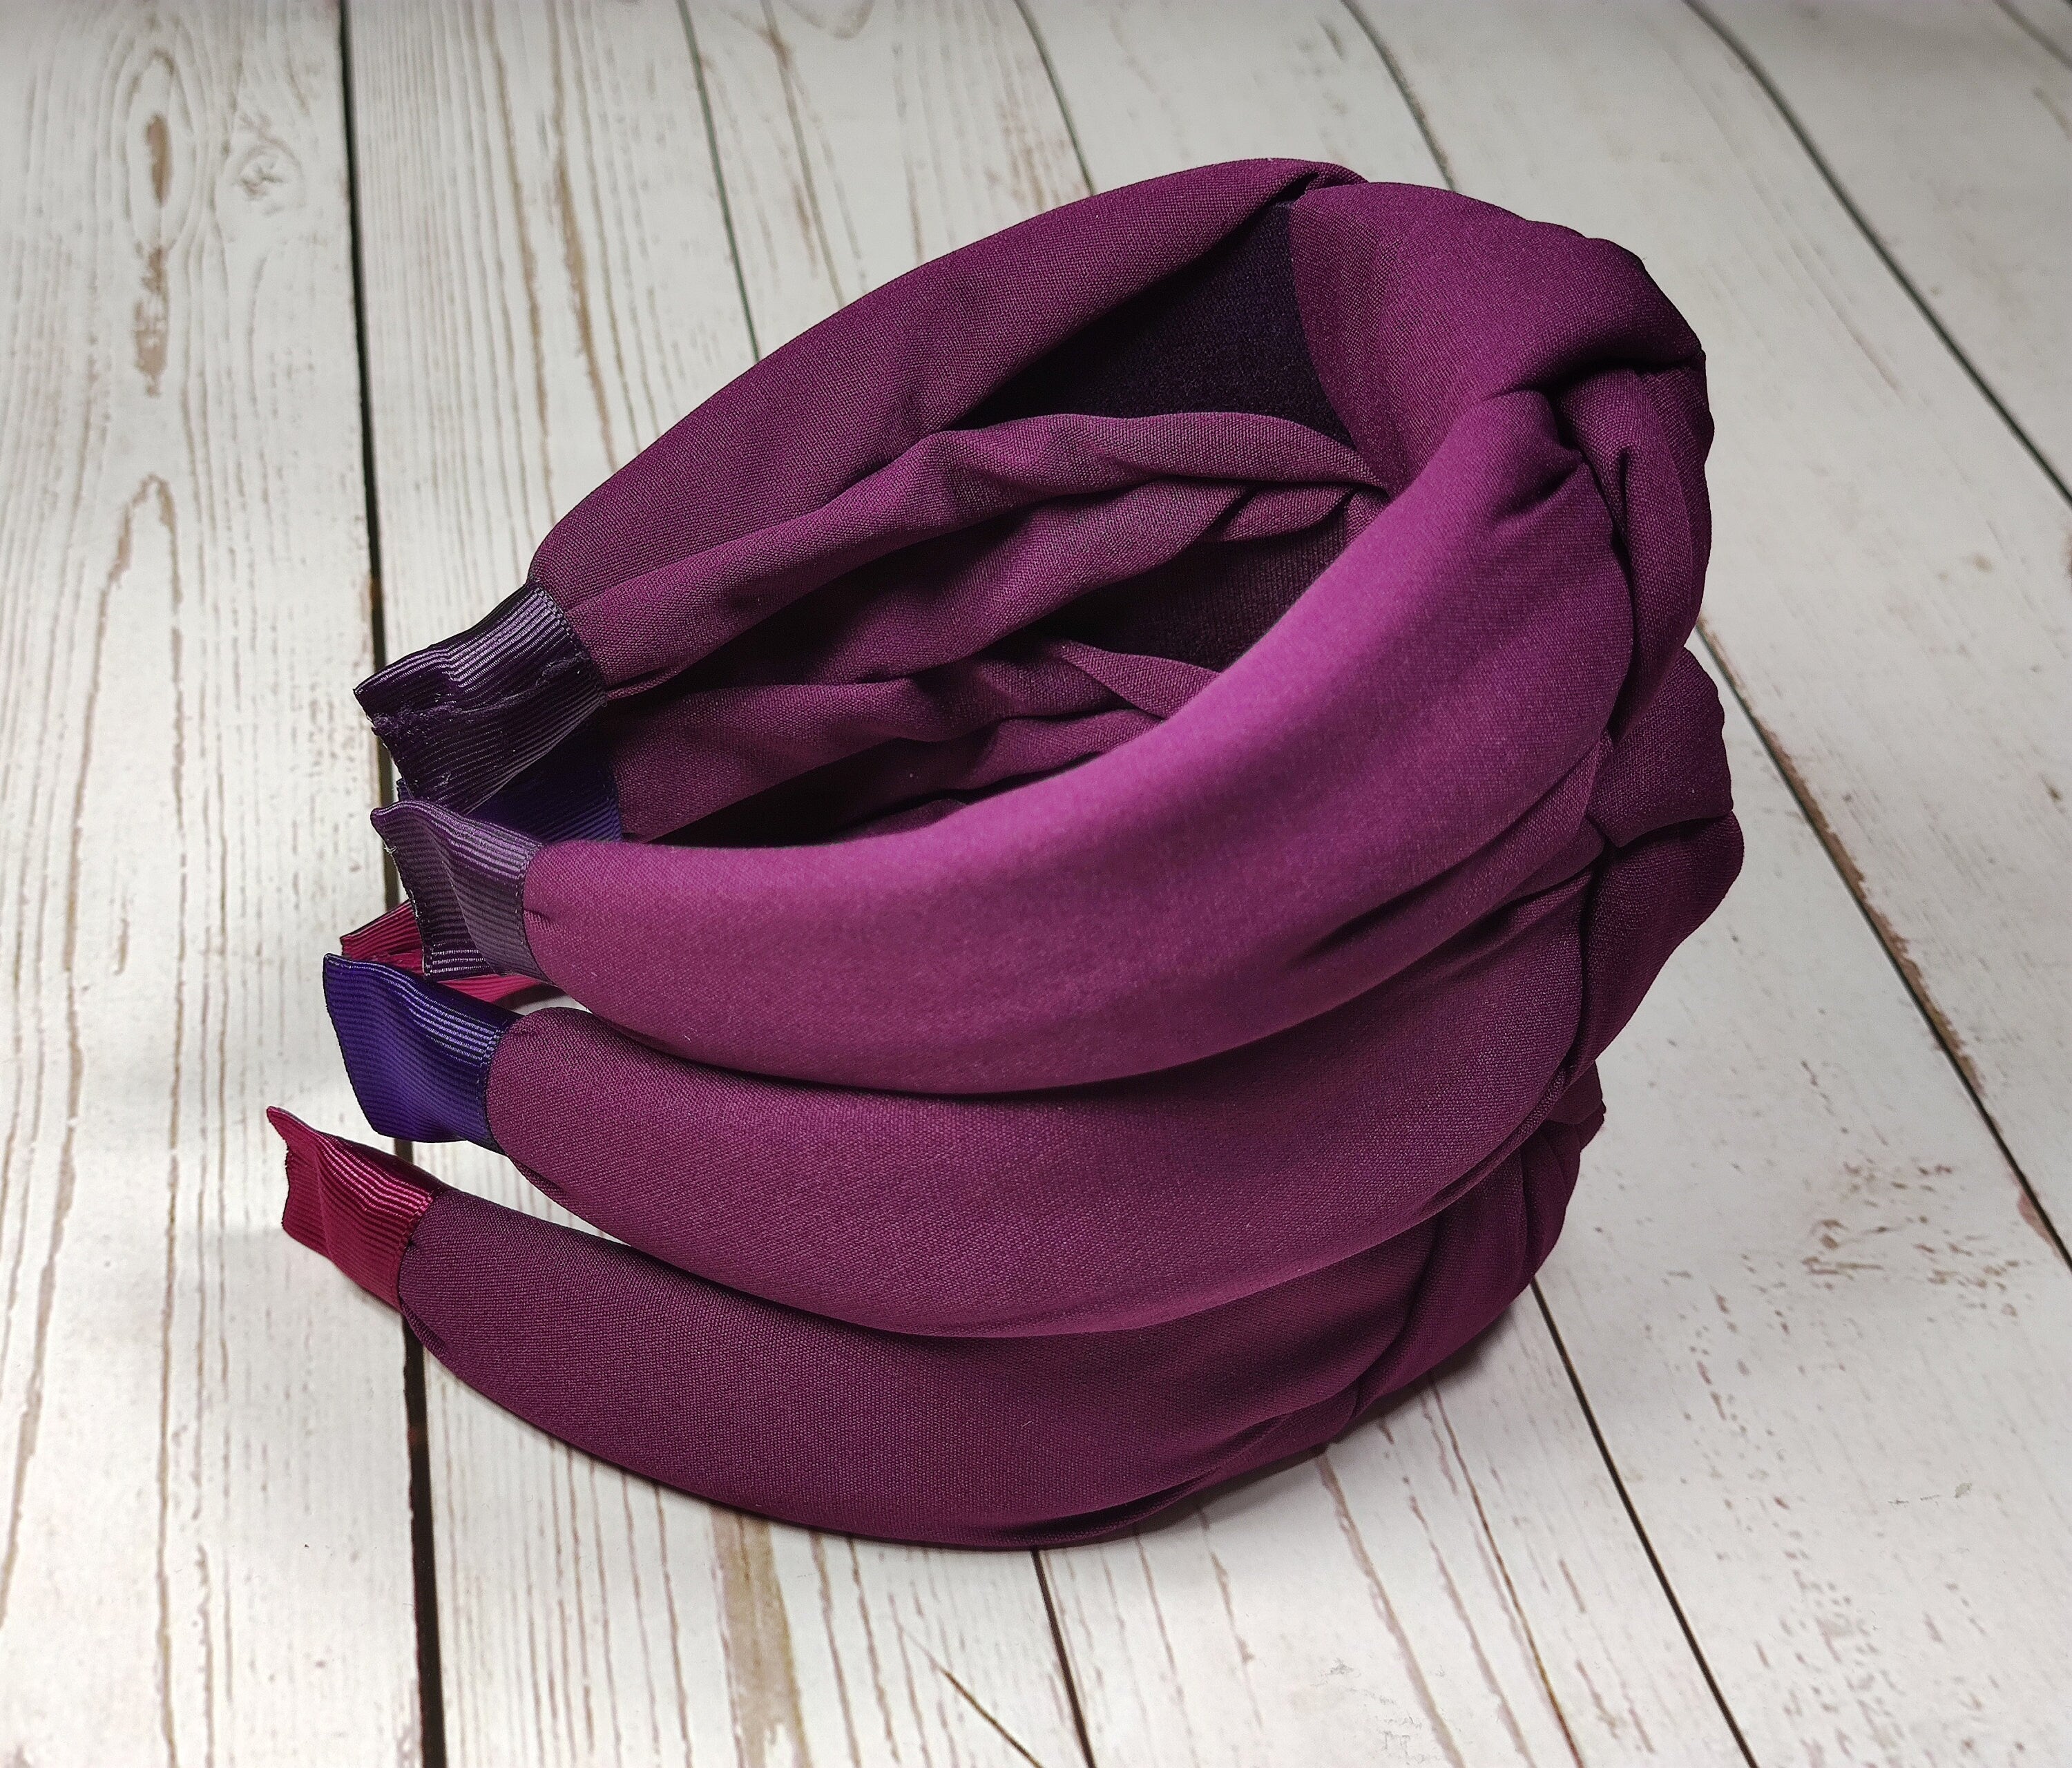 Find the best maroon color headband that will suit your style and pair it up with some of our trendy knotted headbands and classic headbands for a stylish and wearable look.